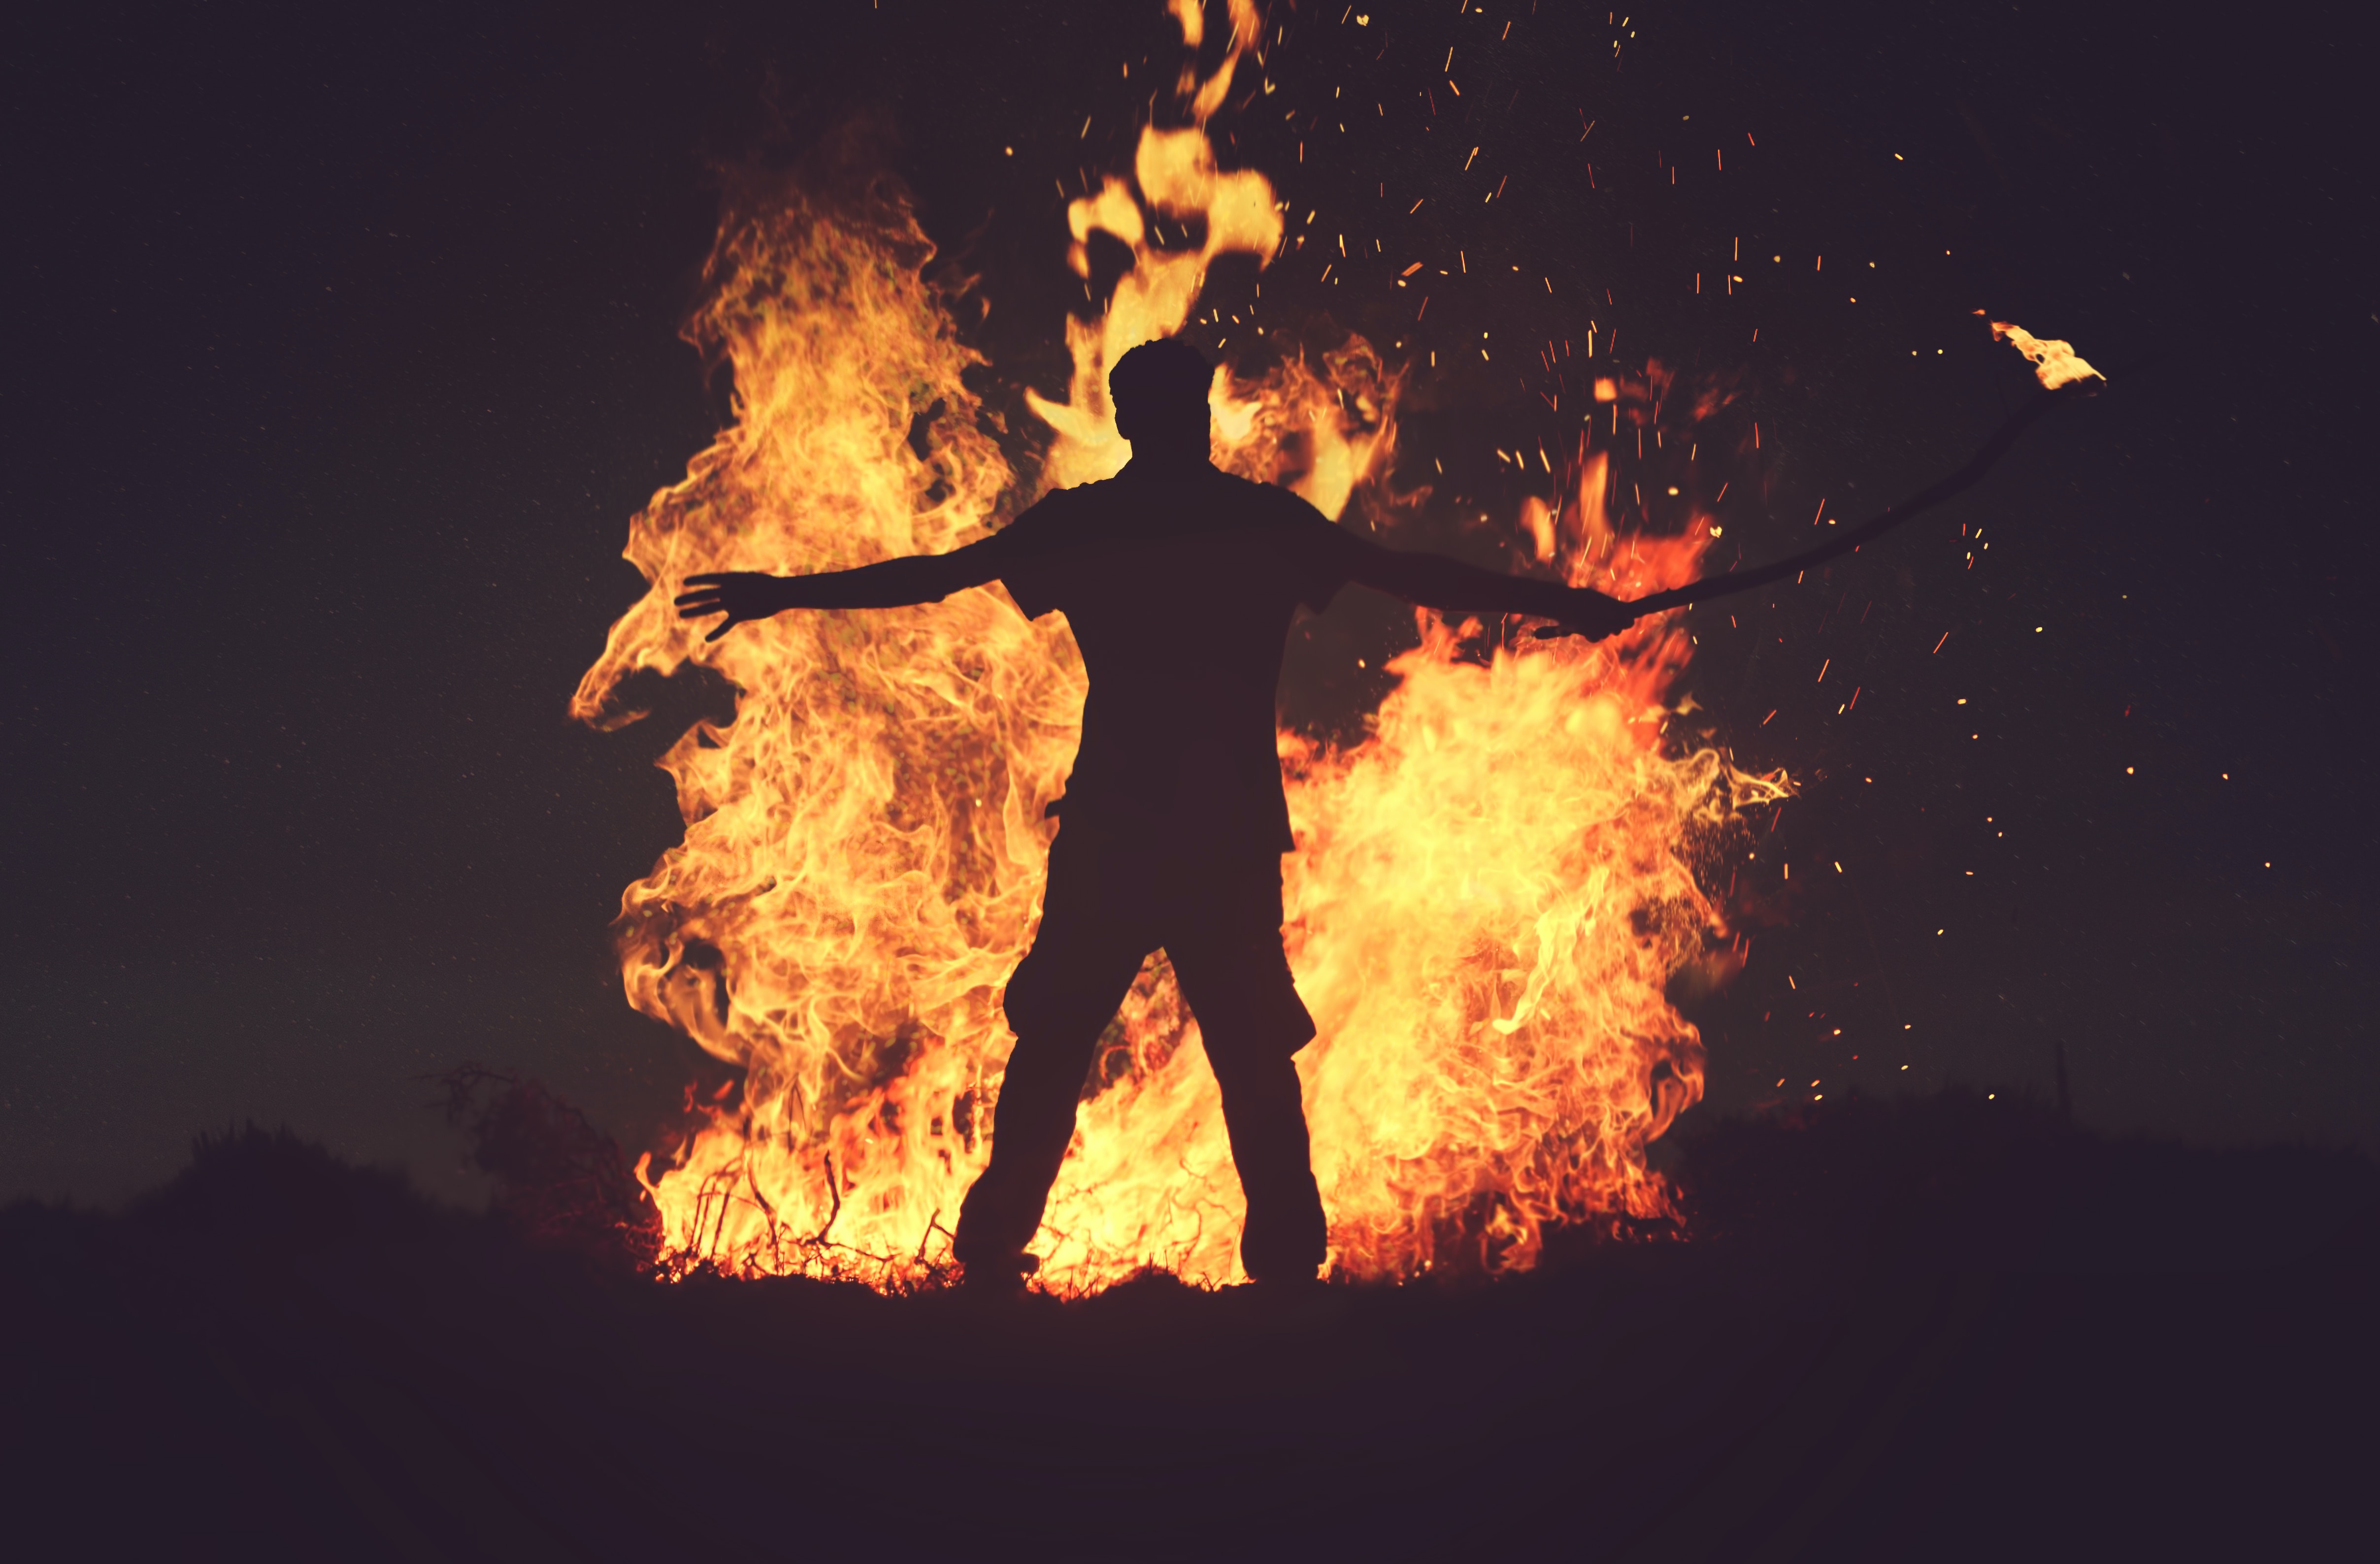 The shape of a person in silhouette against a large fire.